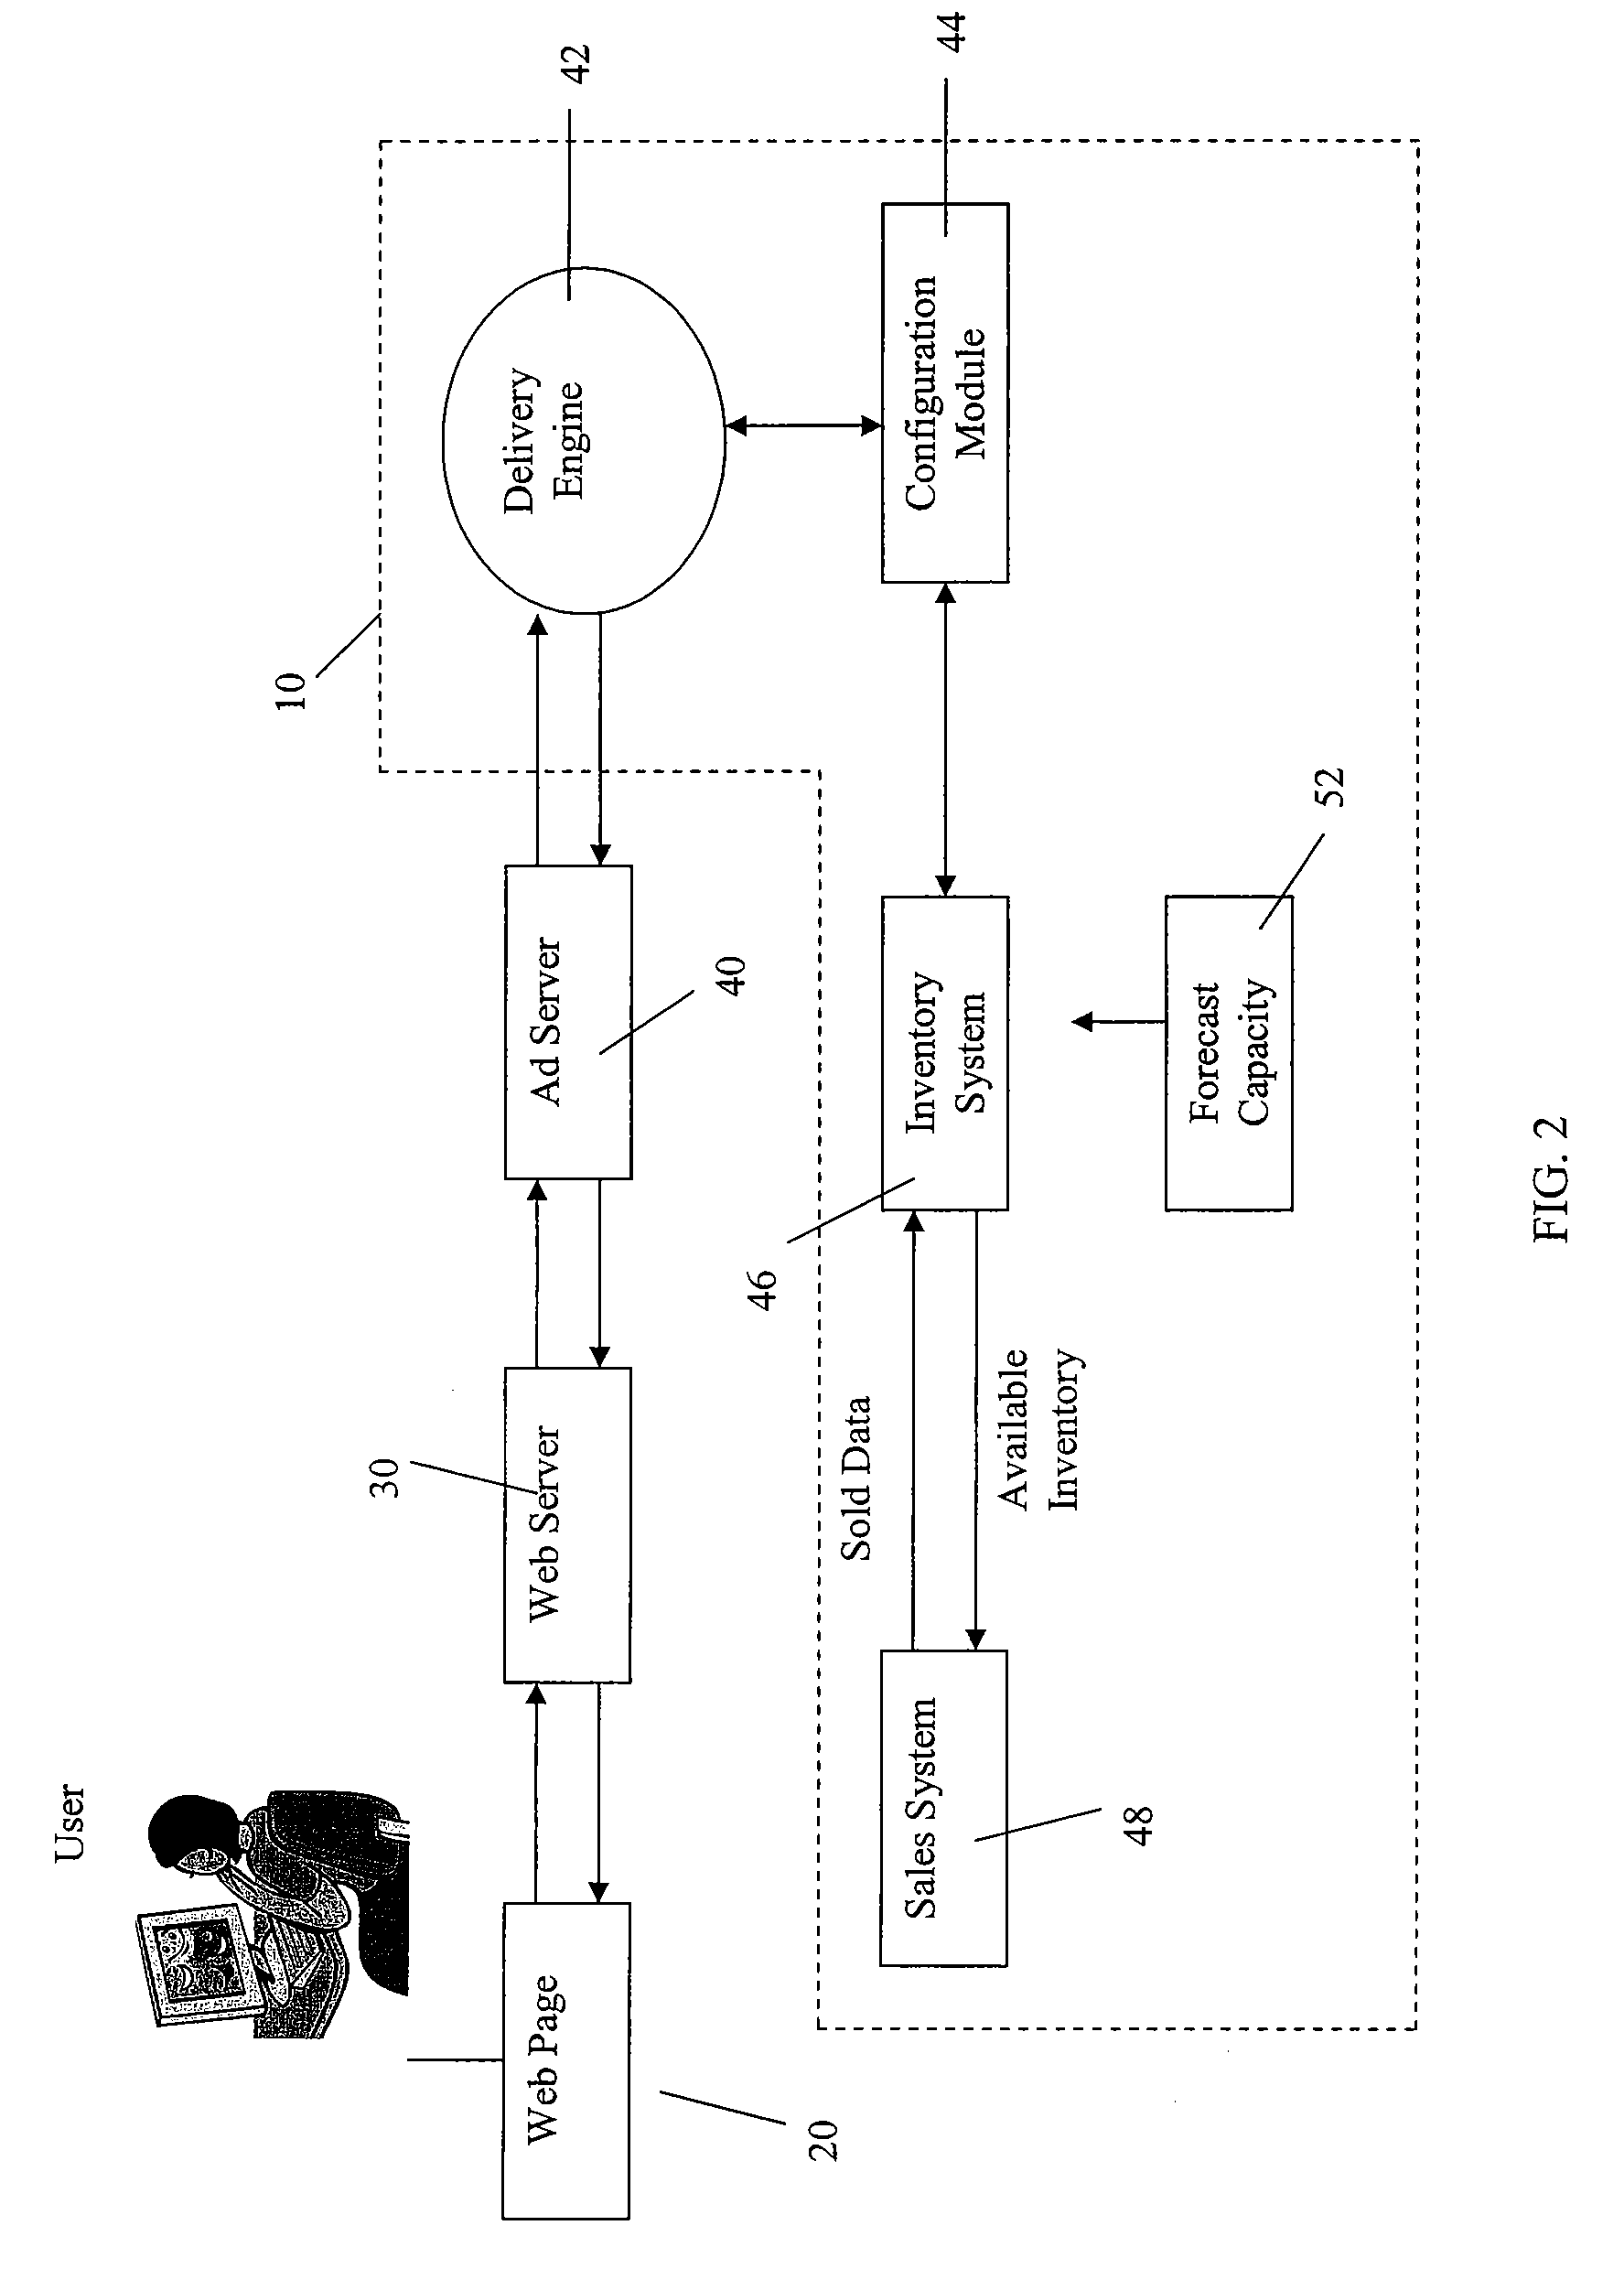 Advertising inventory management system and method